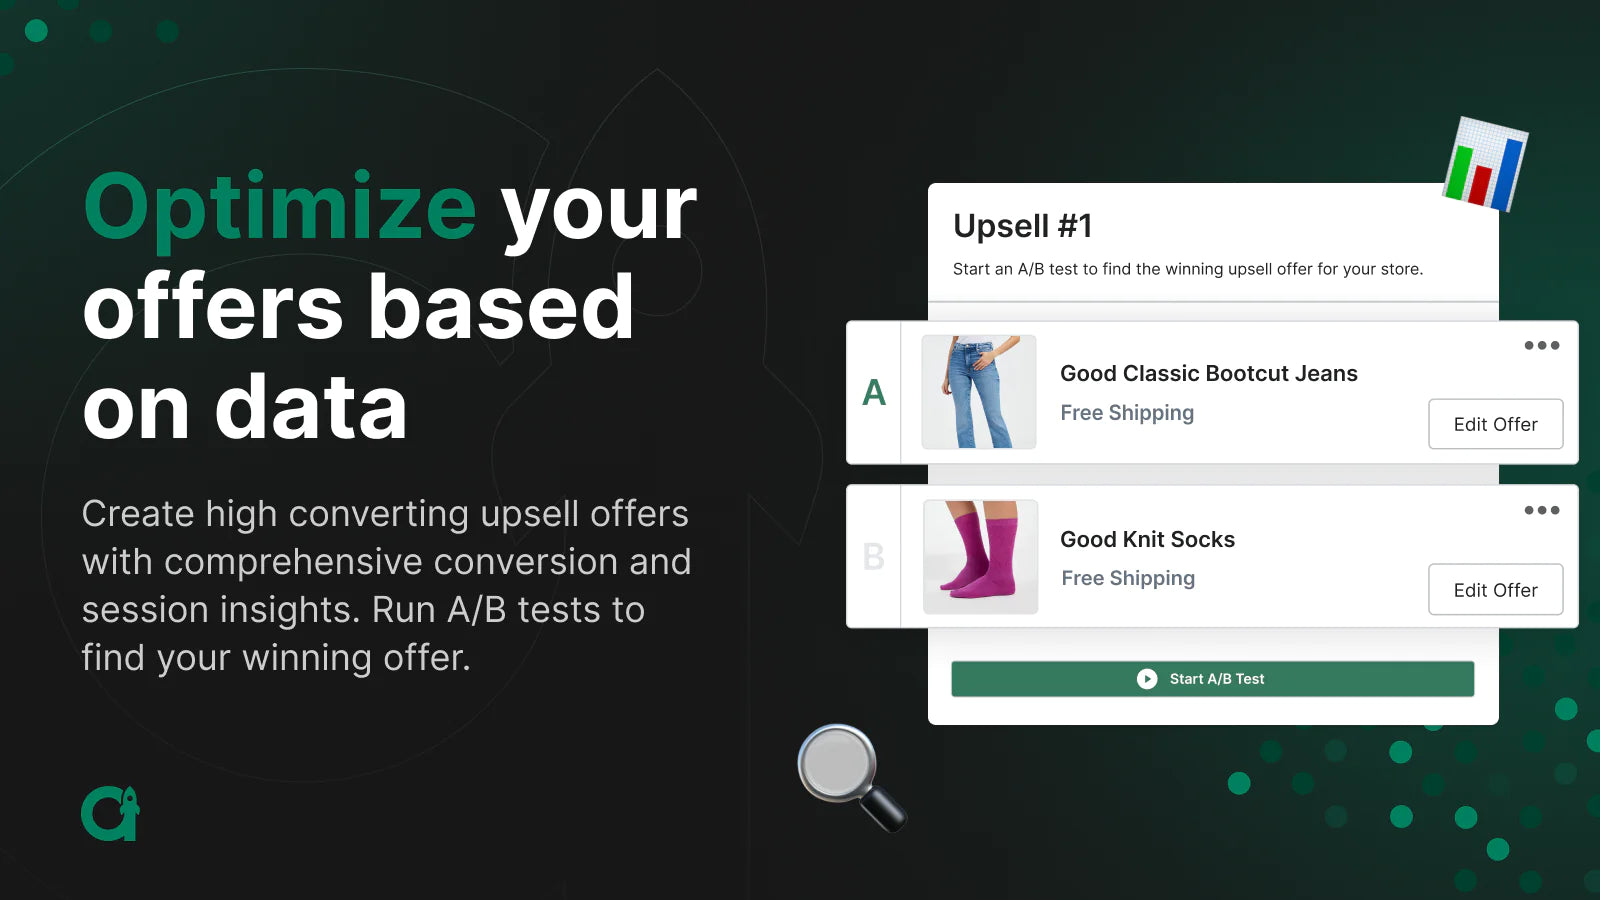 the image shows that you can optimize your offers based on data